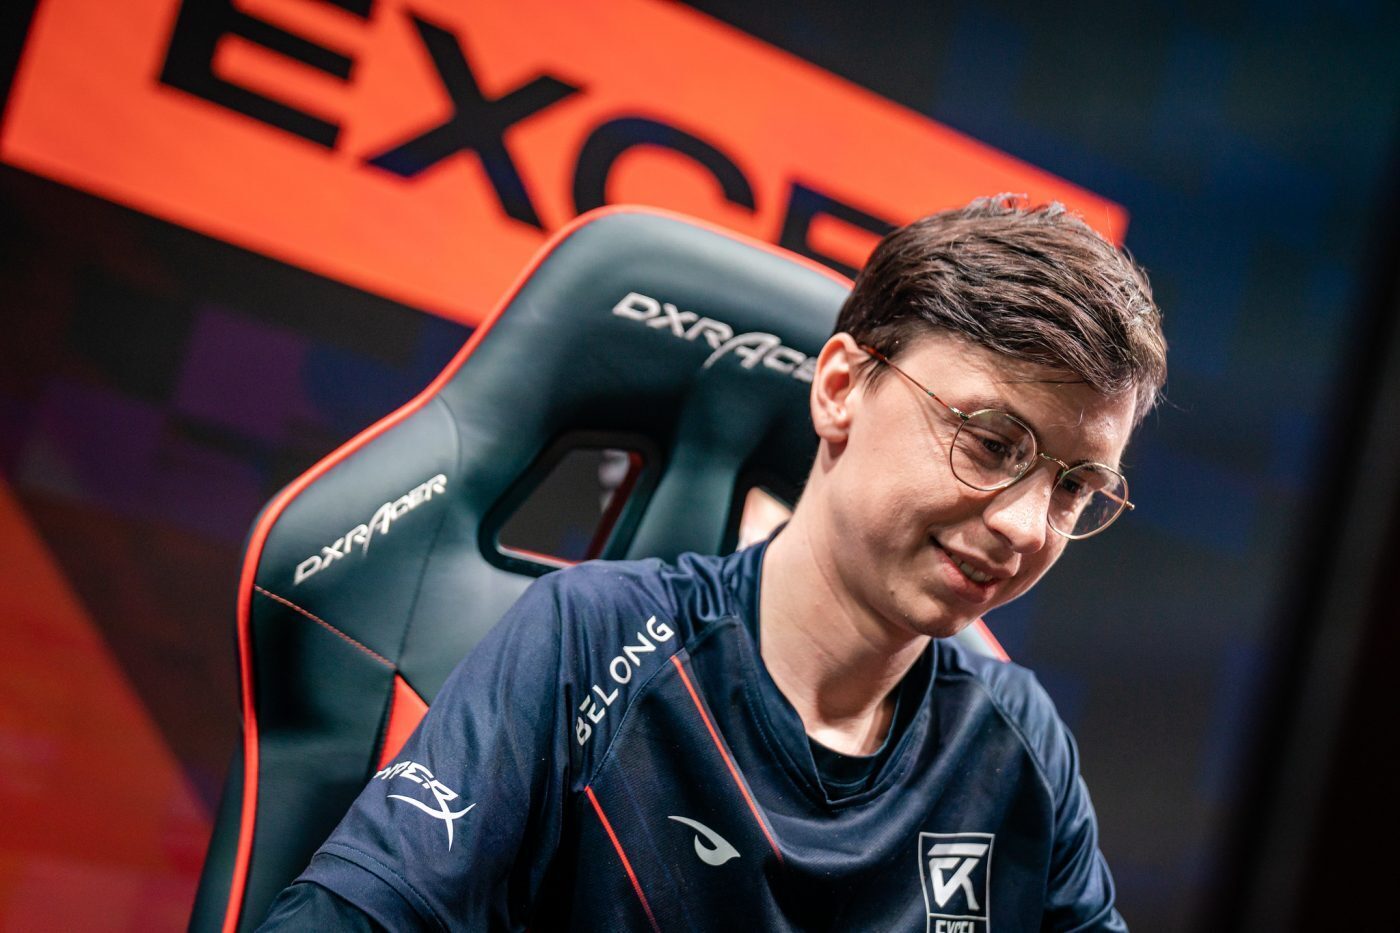 Excel jungler Marc “Caedrel” Lamont smiles after a rare win for the roster. Image via Riot Games.